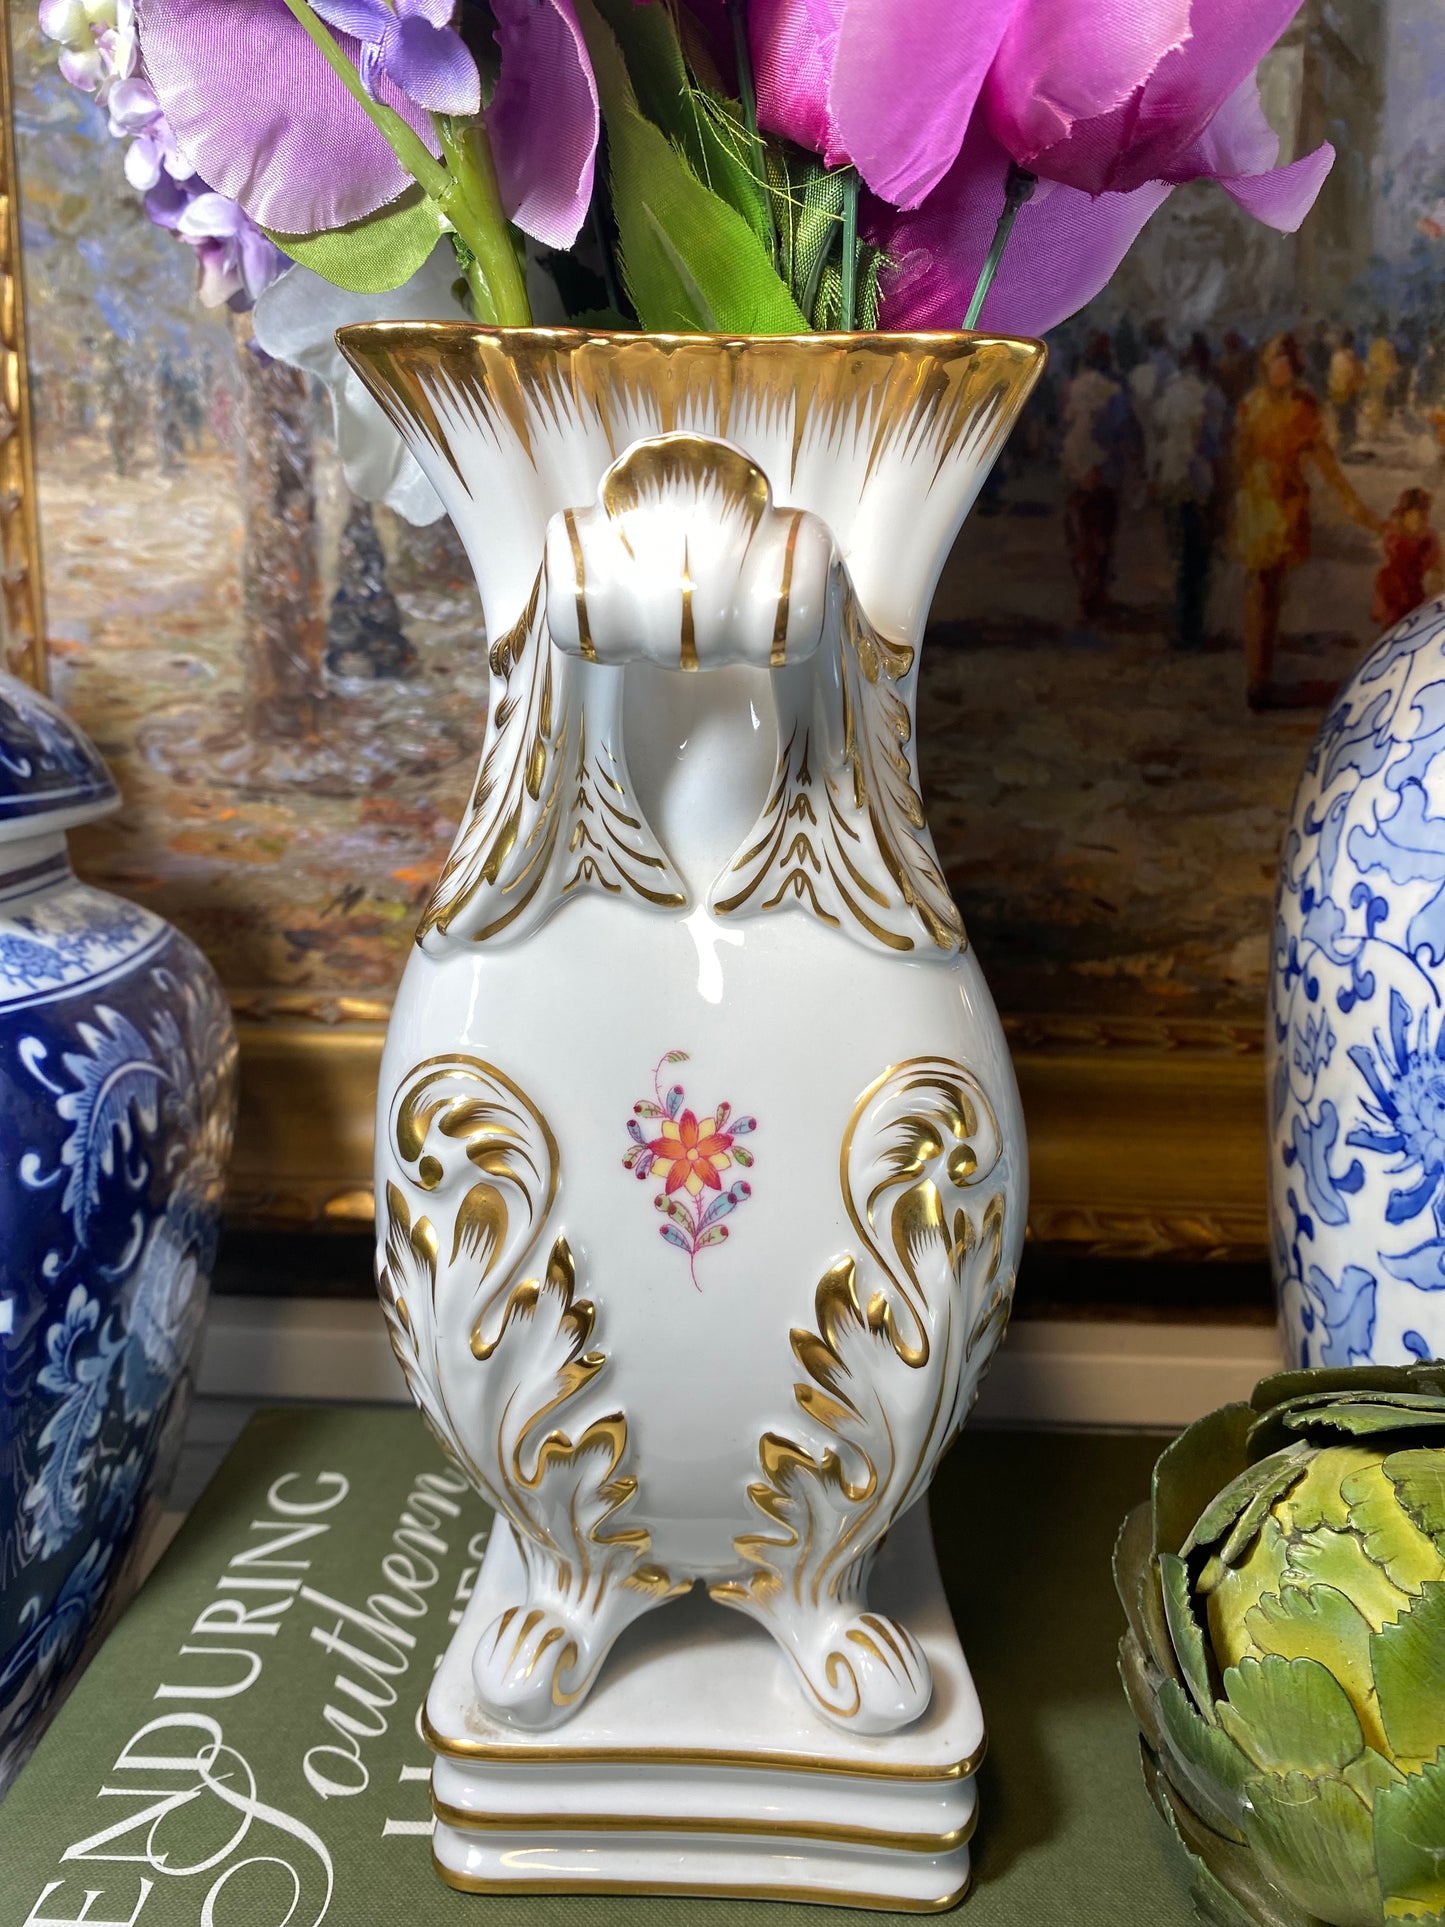 RARE - Herend, 10.5" Tall "Chinese Bouquet" Multi-Tone Vase - Pristine!